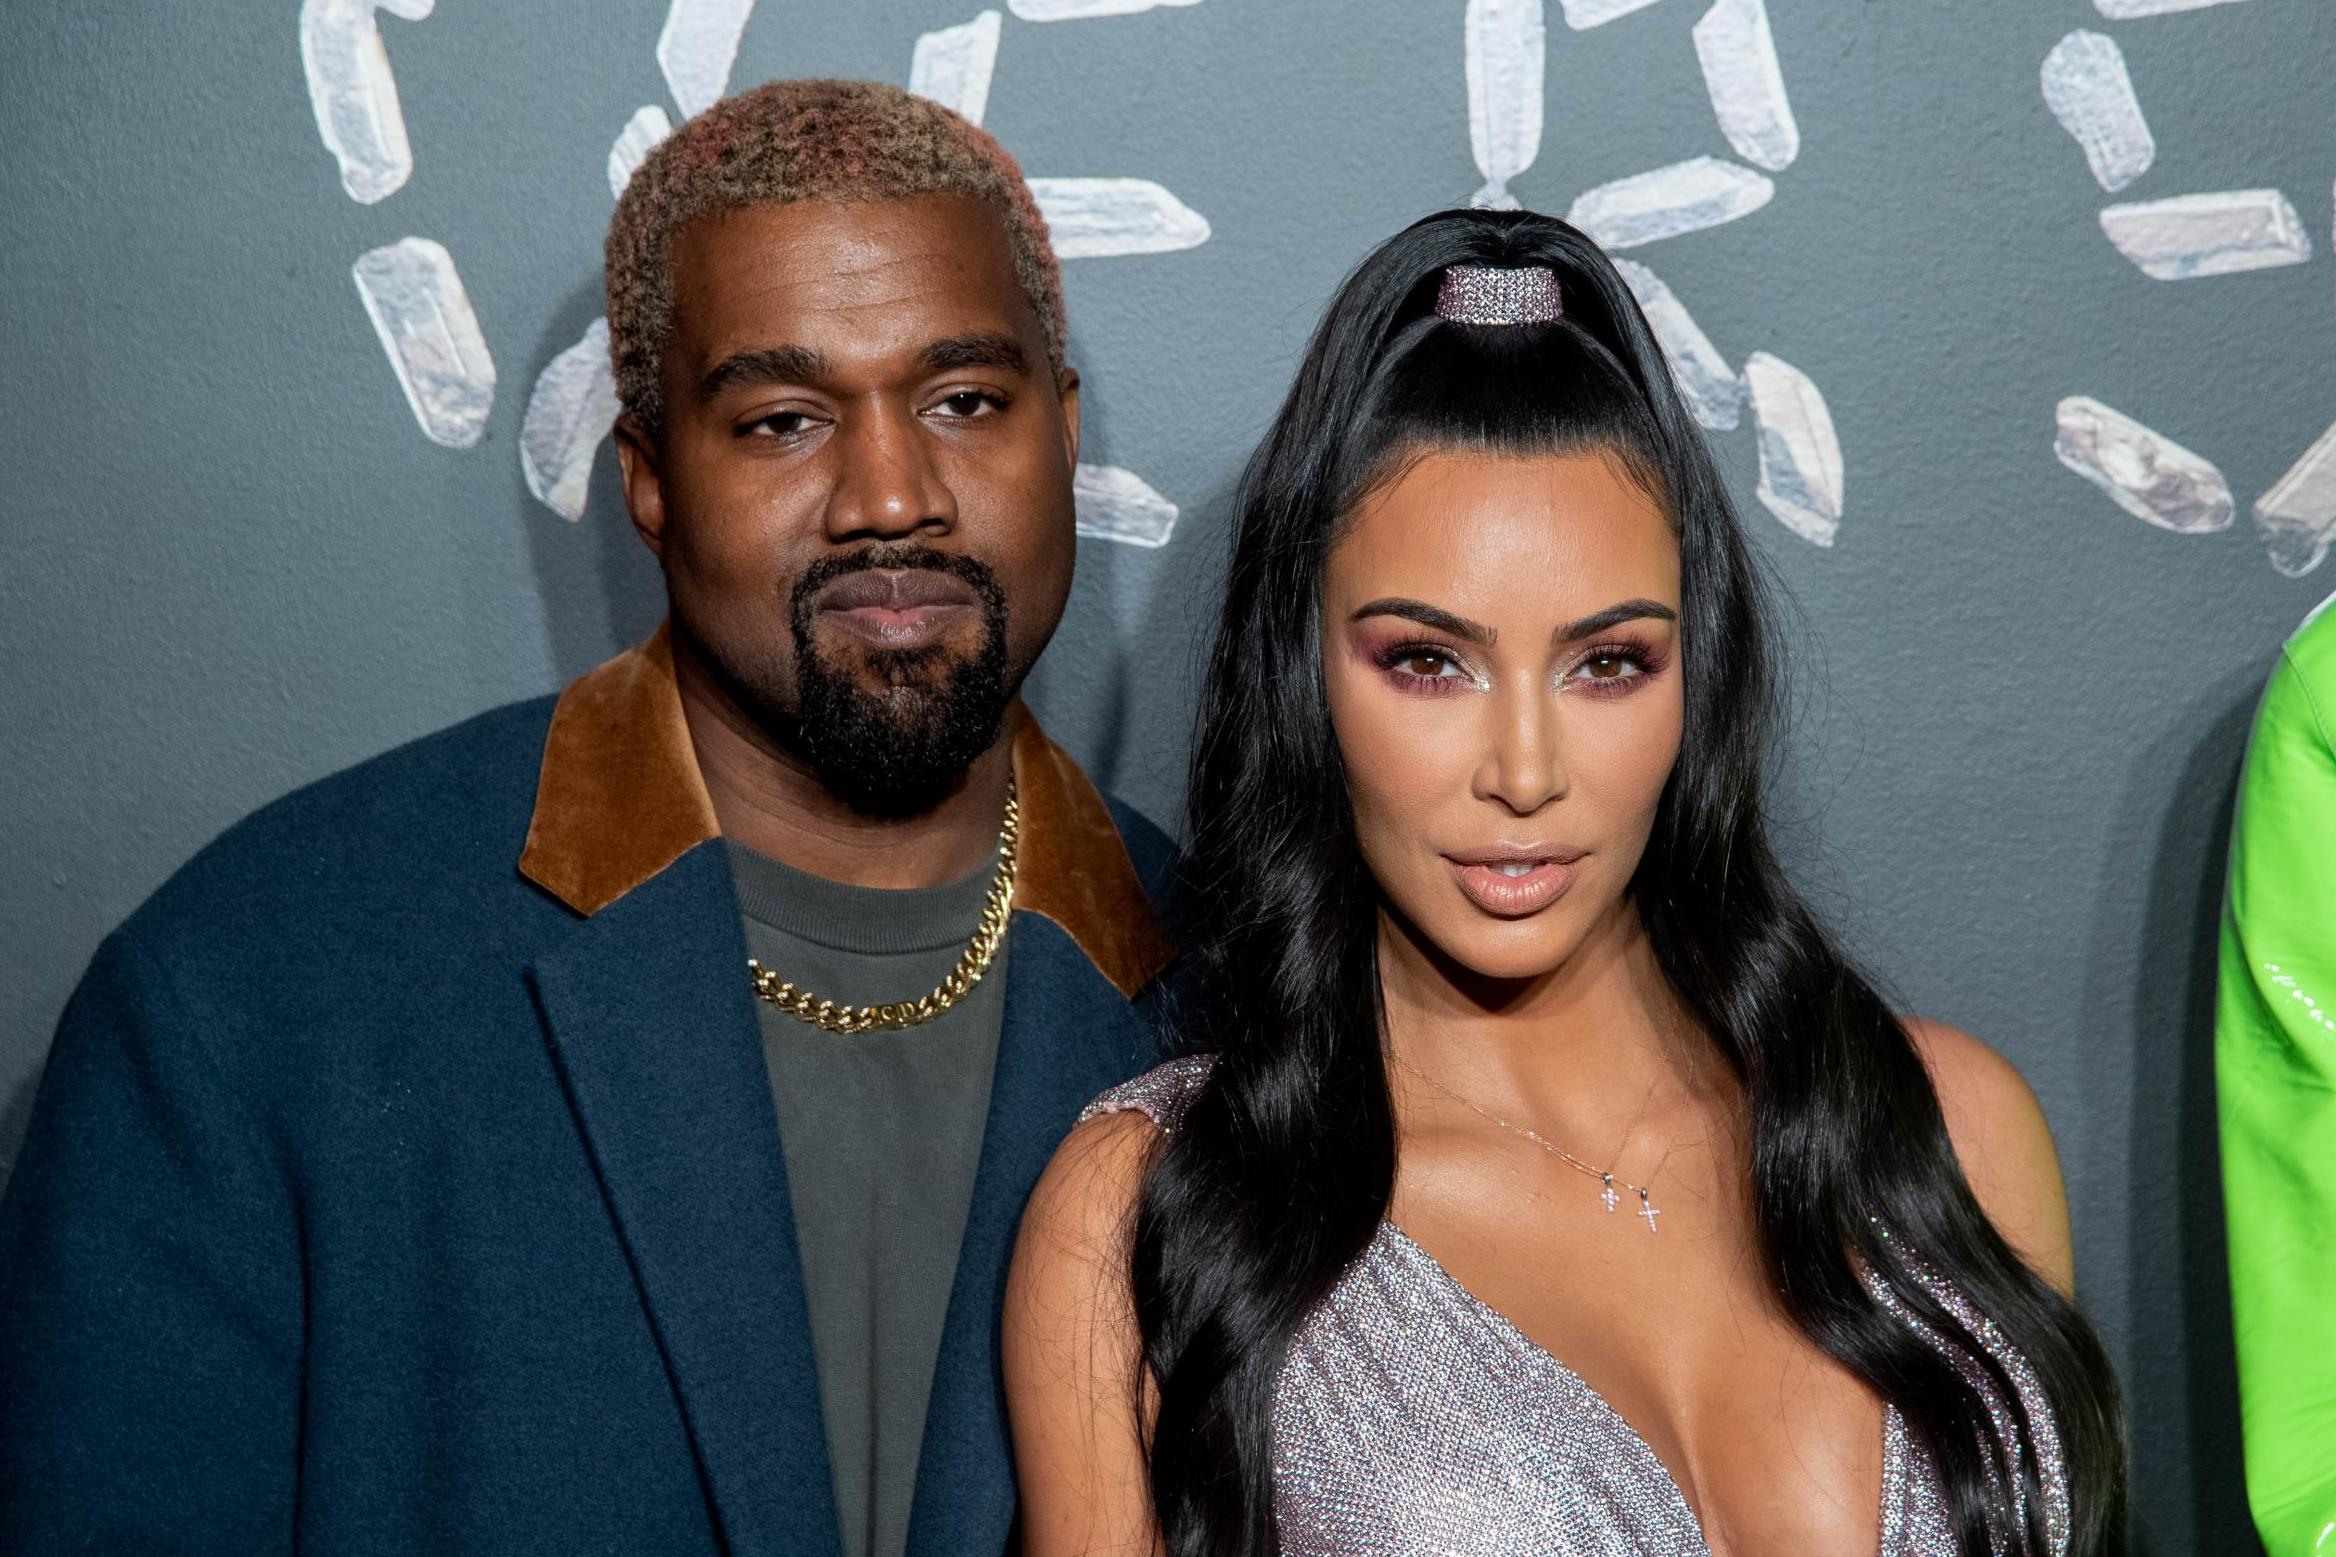 Kanye West suggest he cheated on Kim Kardashian after birth of their first two kids